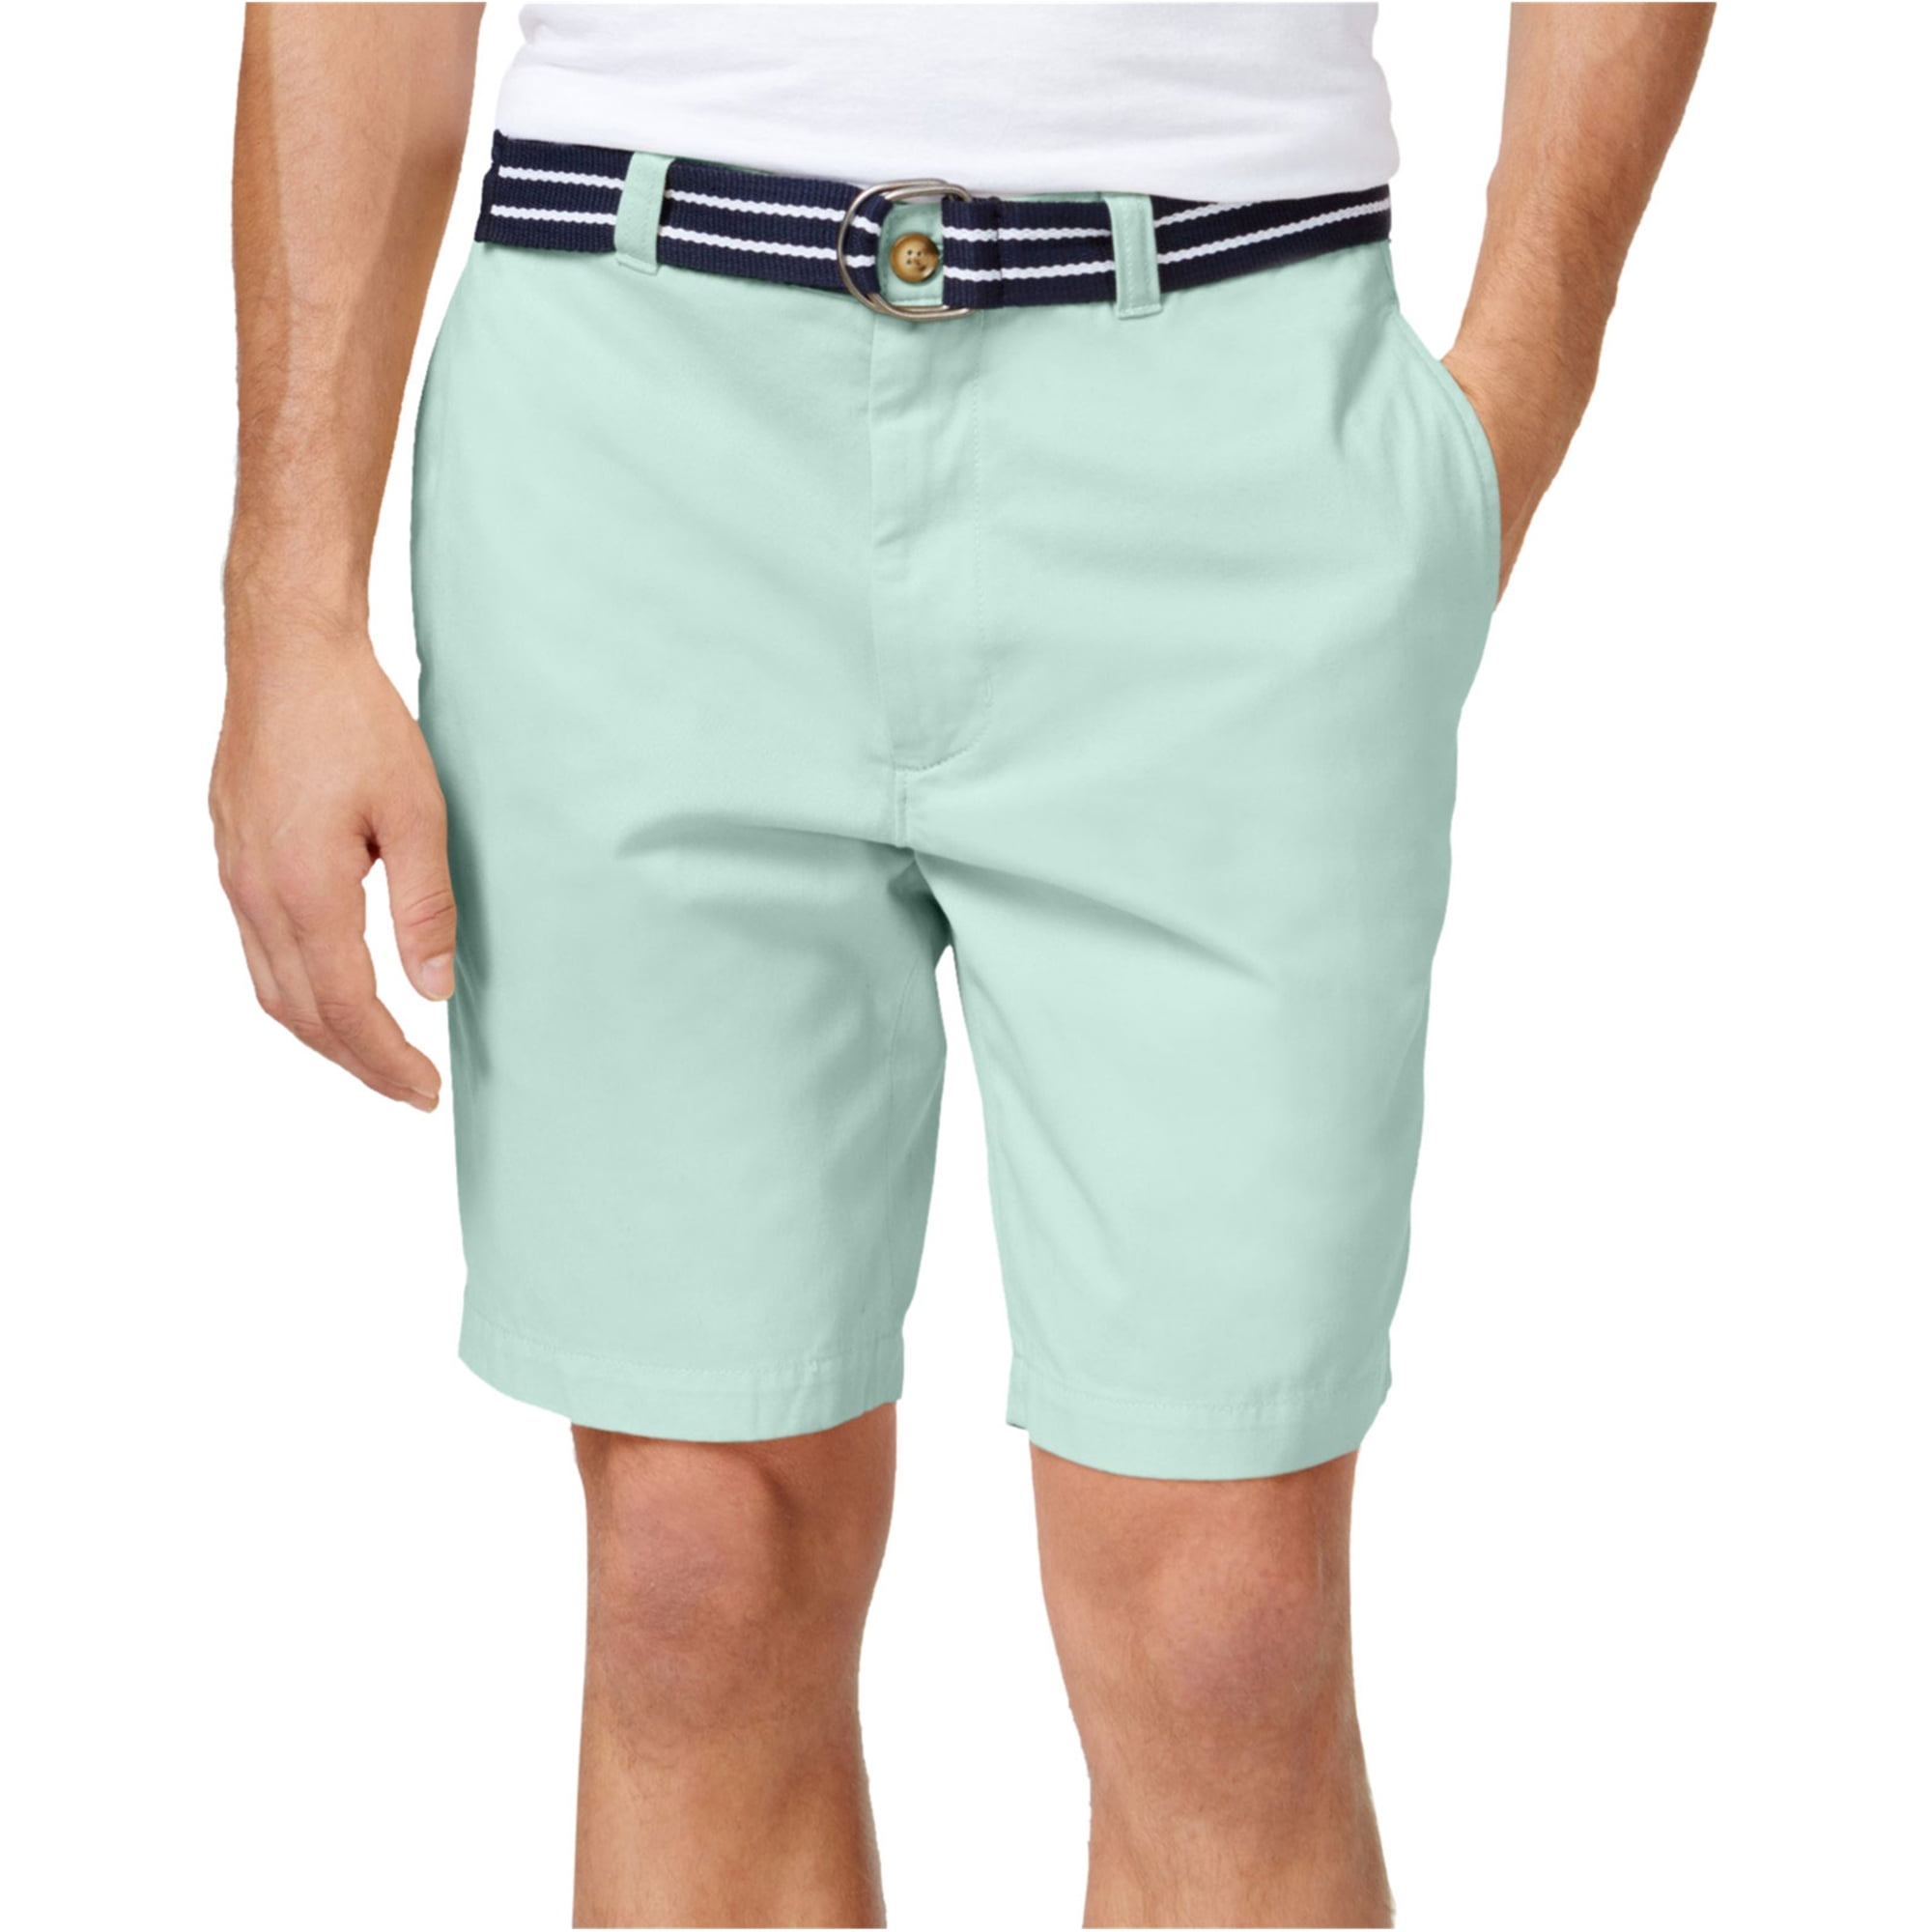 Size 34 or 36 $46.00 Club Room Men Estate Flat-Front Shorts with Belt 9" Inseam 